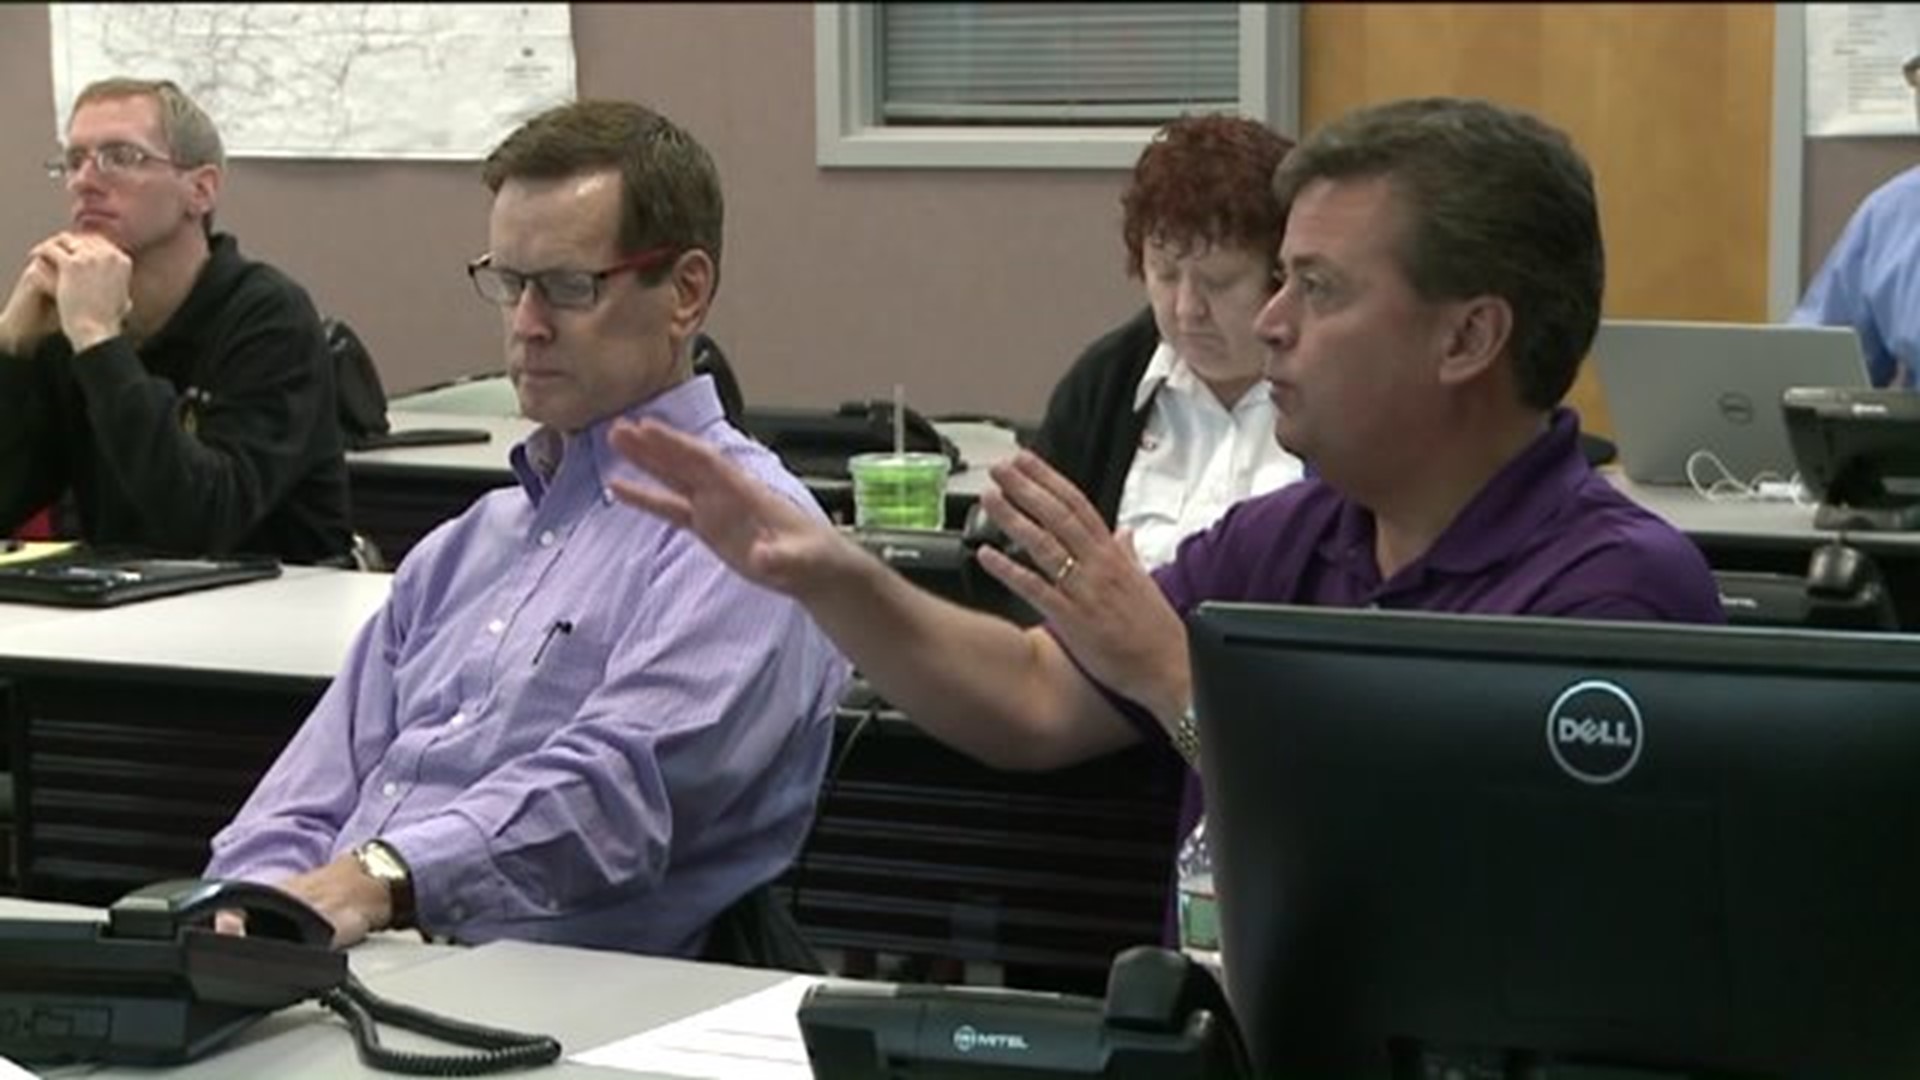 NWS Holds Workshop to Improve Communication During Severe Weather